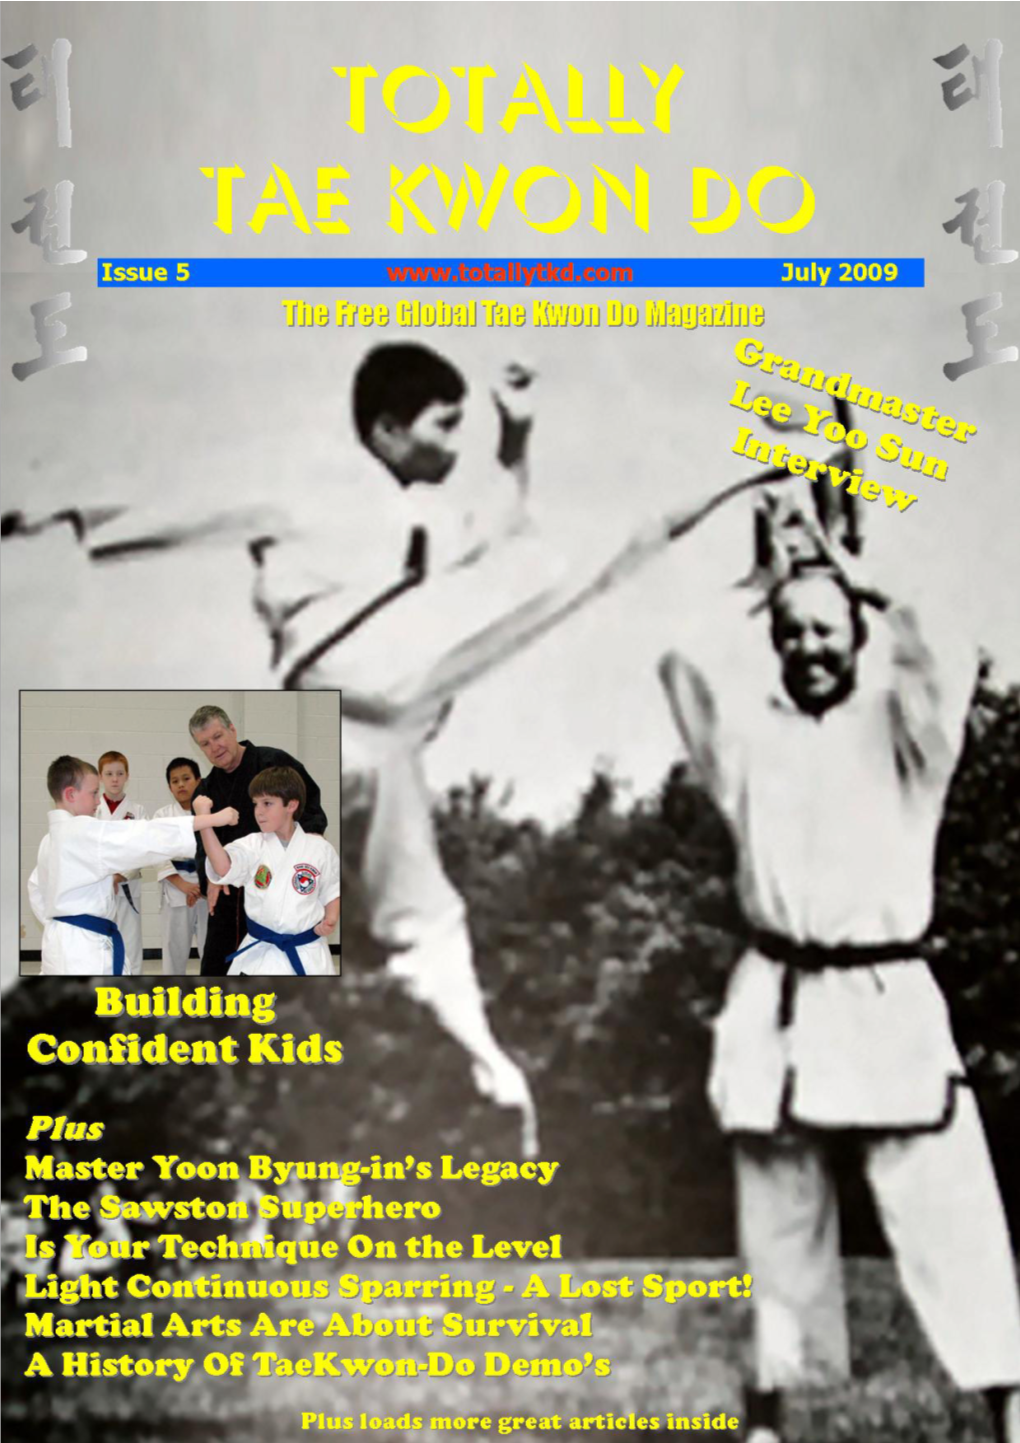 Totally Tae Kwon Do Magazine, Flicks Through It and Feels Email: Editor@Totallytkd.Com Tel: +44 (0)7759 438779 That There Isn't Enough WTF Related Articles